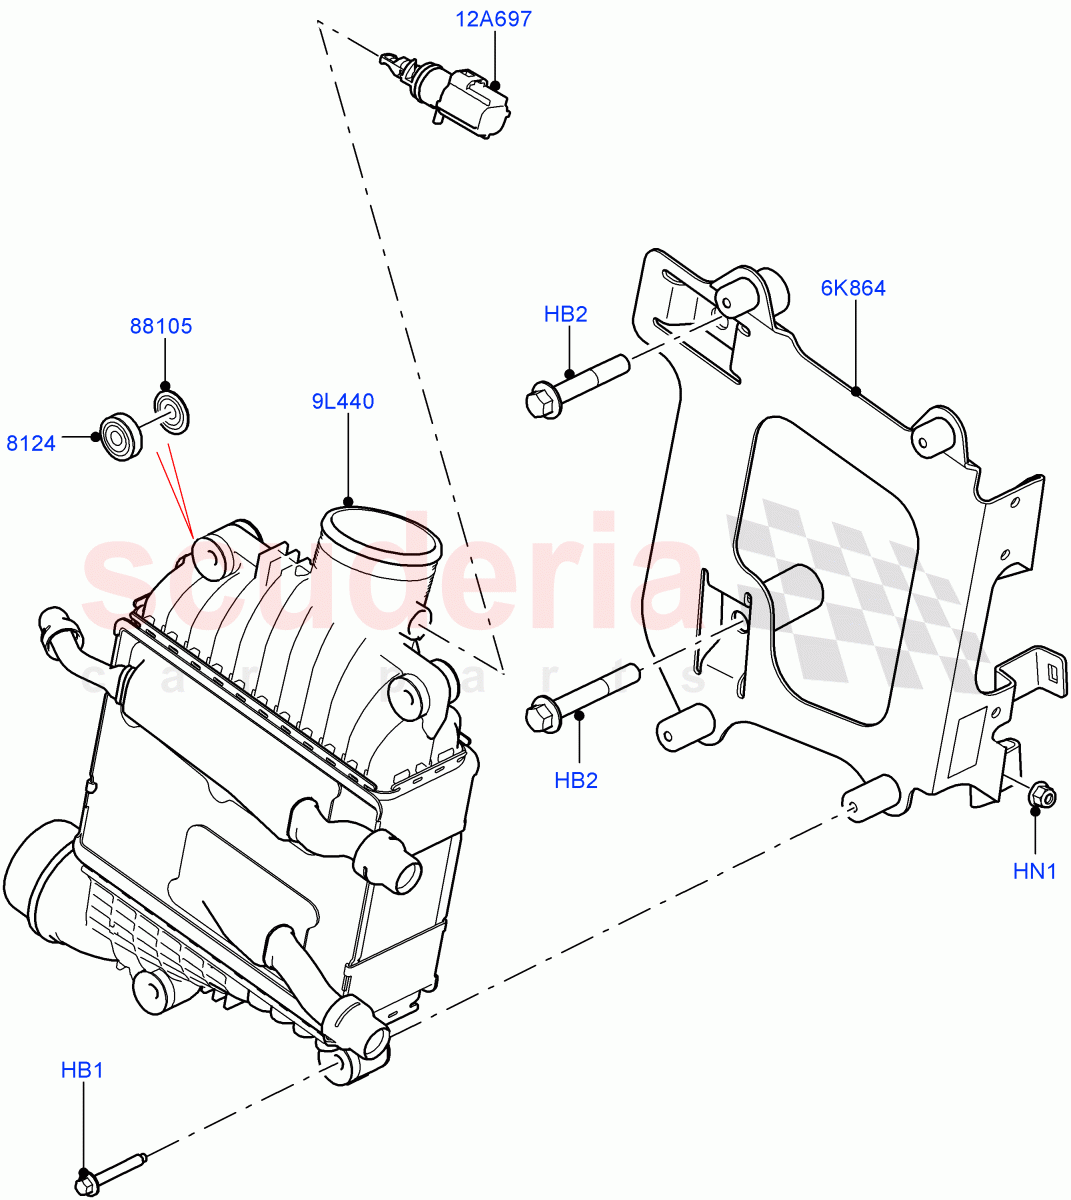 Intercooler/Air Ducts And Hoses(Nitra Plant Build)(2.0L I4 DSL MID DOHC AJ200,2.0L I4 DSL HIGH DOHC AJ200)((V)FROMK2000001) of Land Rover Land Rover Defender (2020+) [2.0 Turbo Diesel]